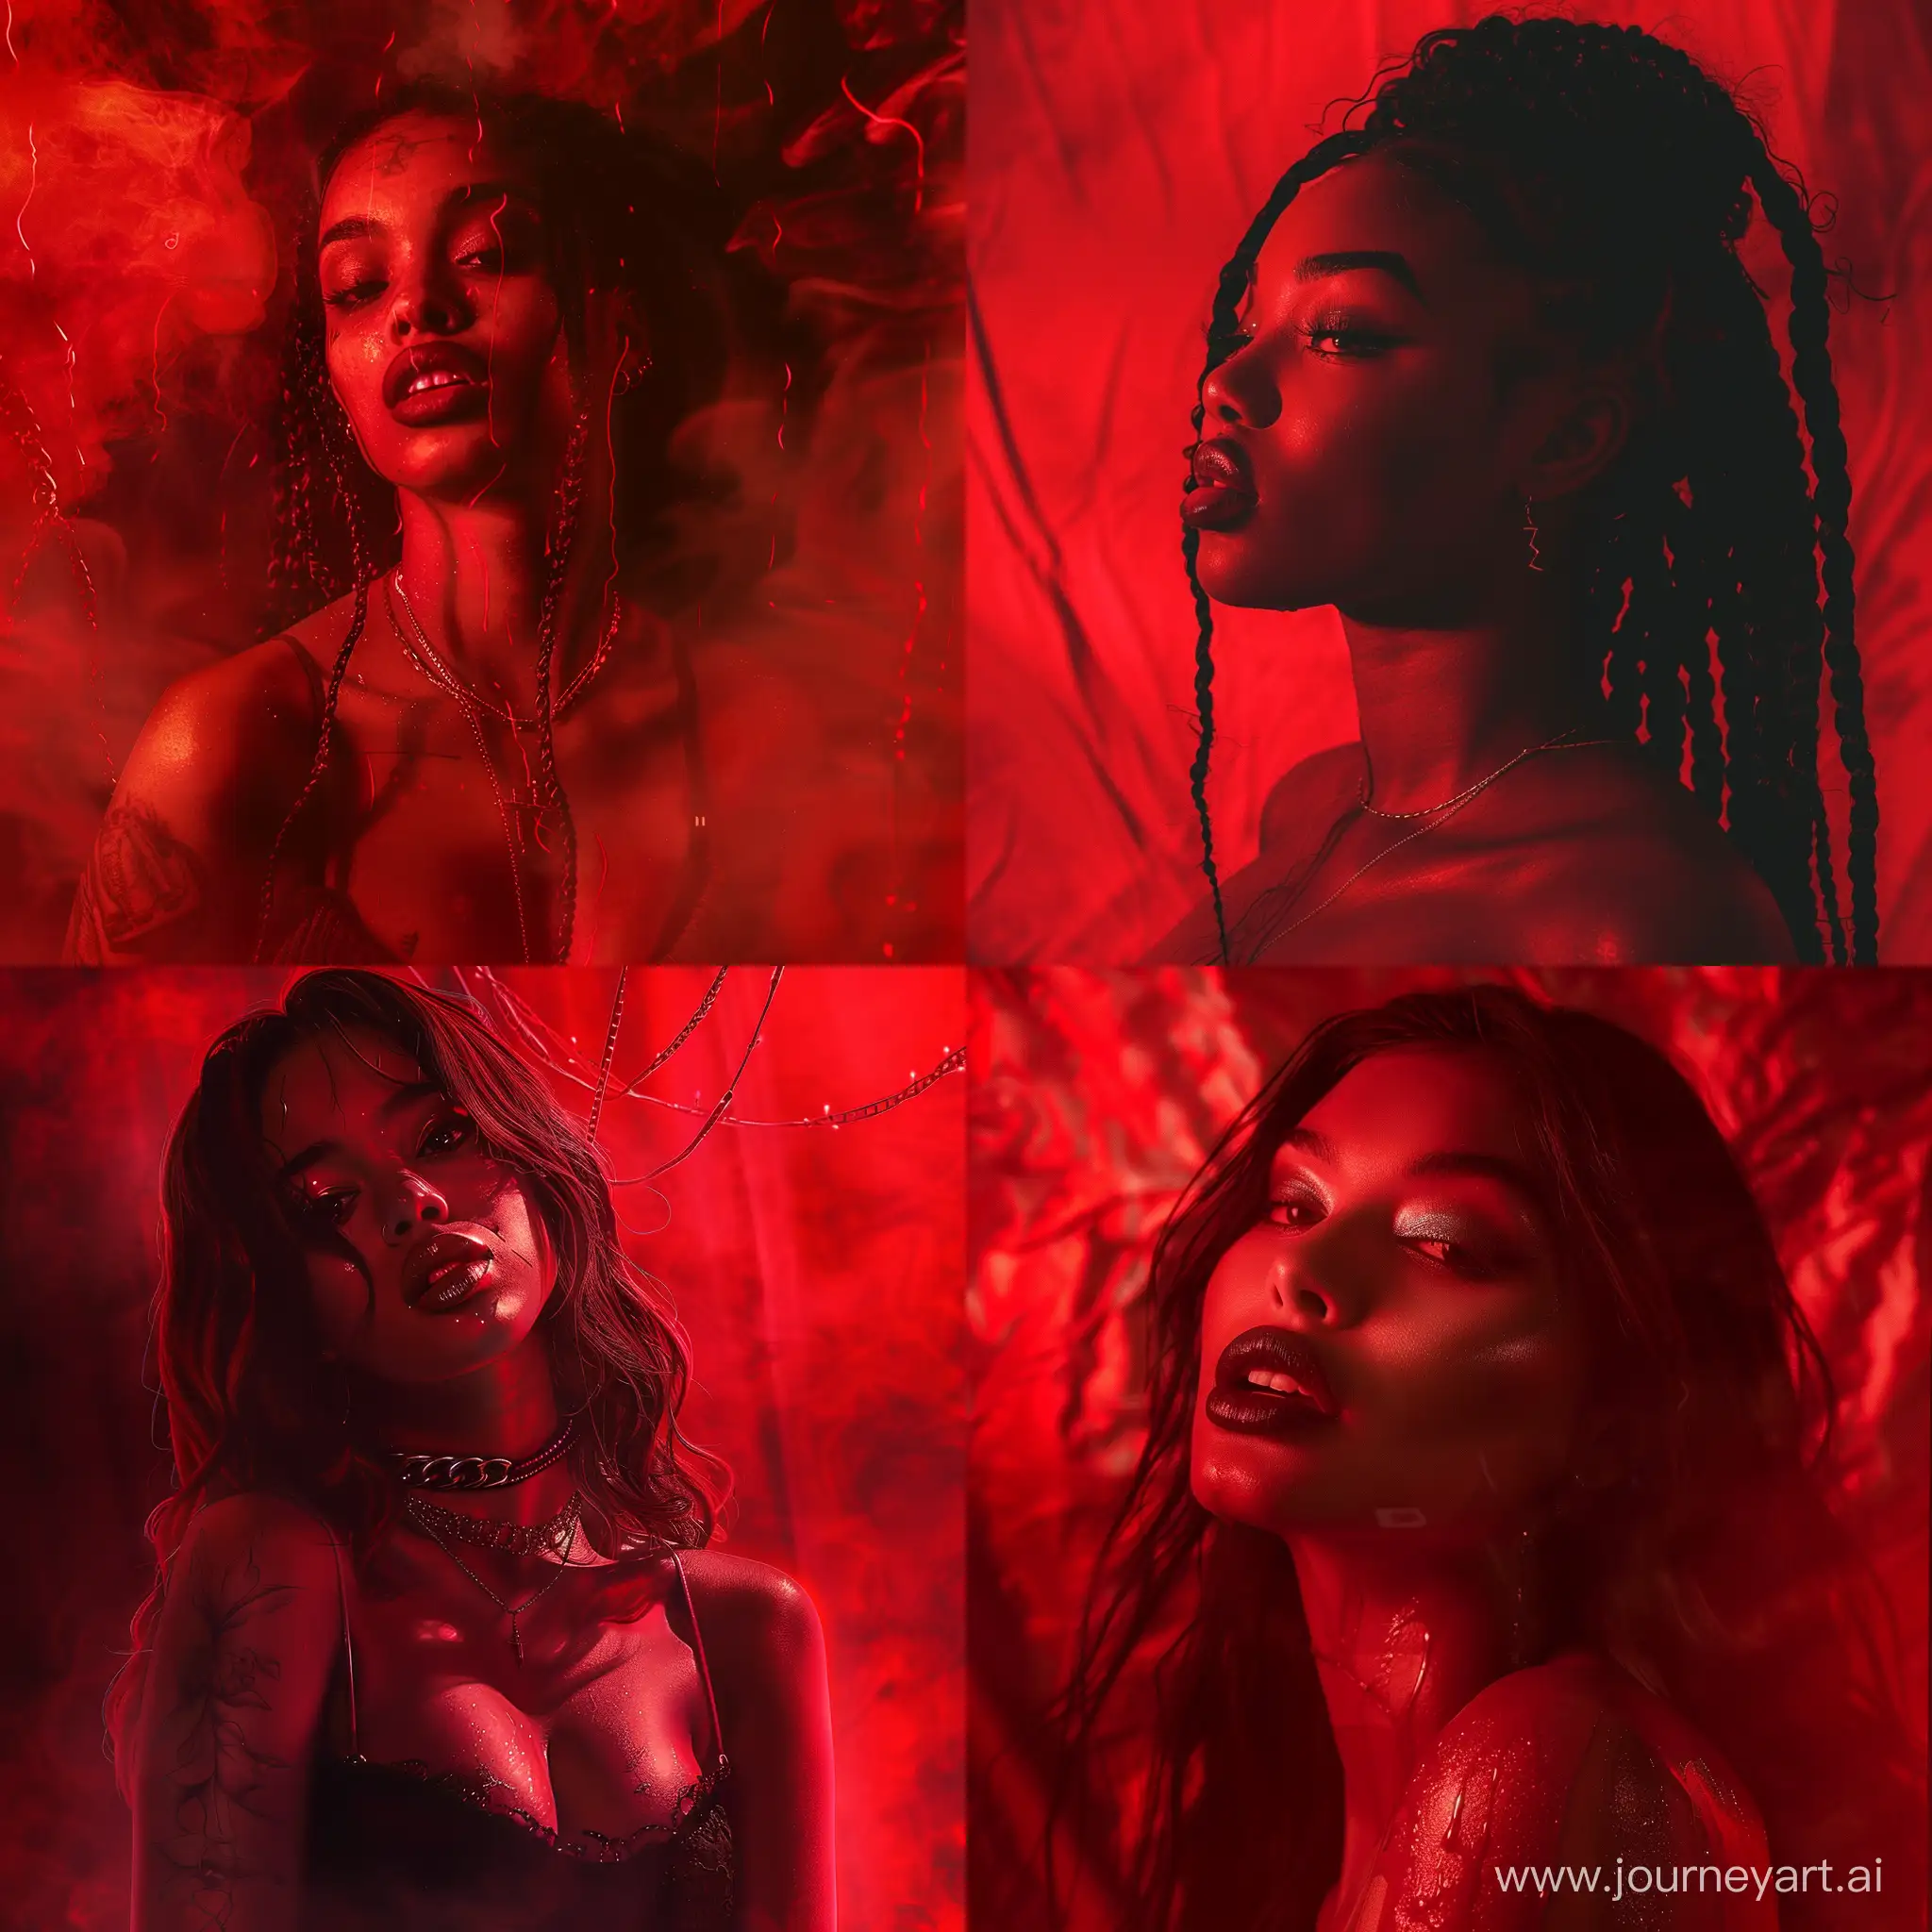 sexy, intriguing, exotic, mysterious but upbeat portrait in a red dark rnb theme